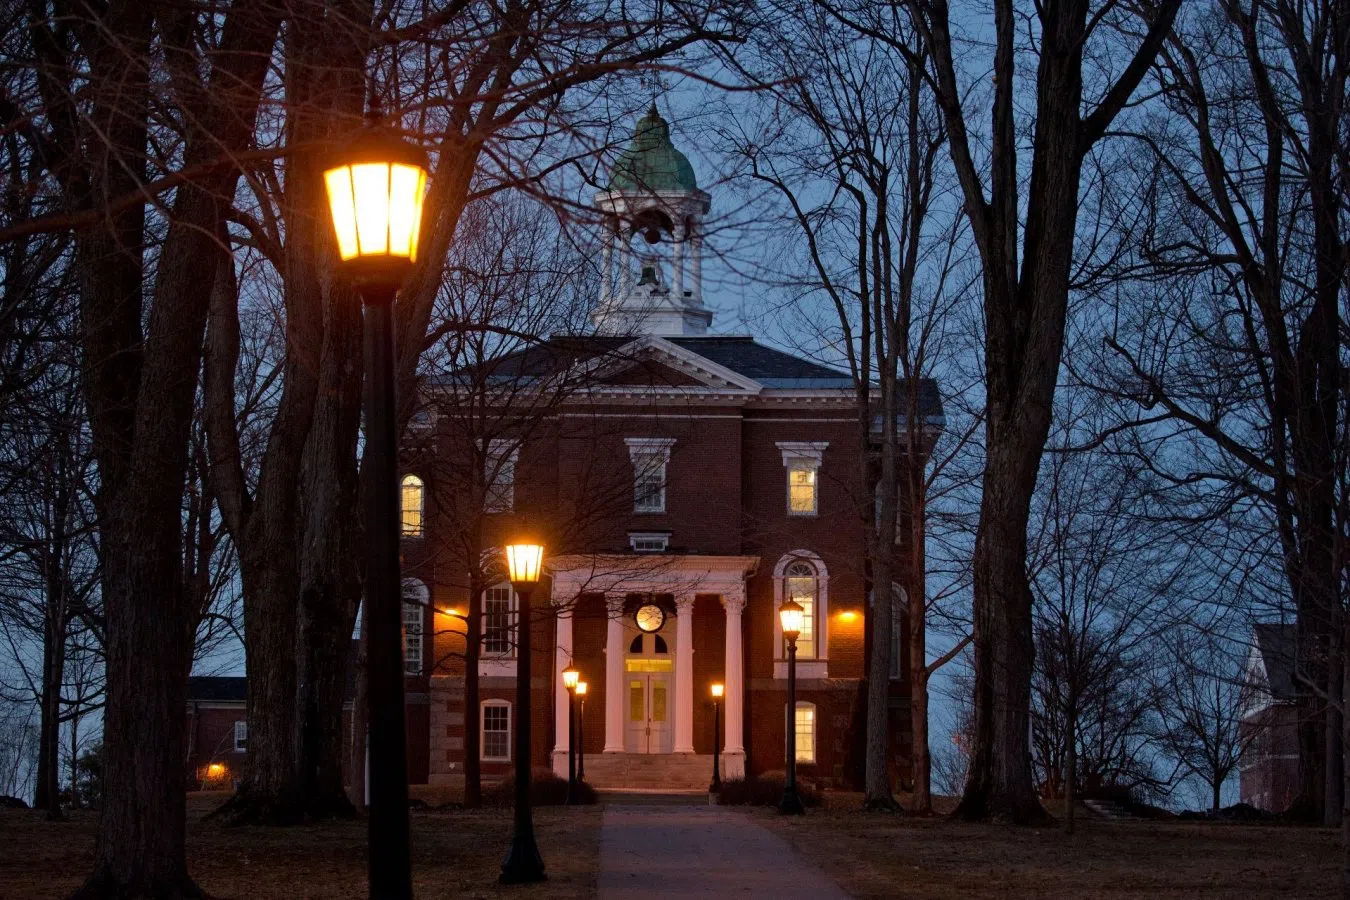 Hathorn Hall at night illuminated by Bates the lamps that light the pathways of the Quad